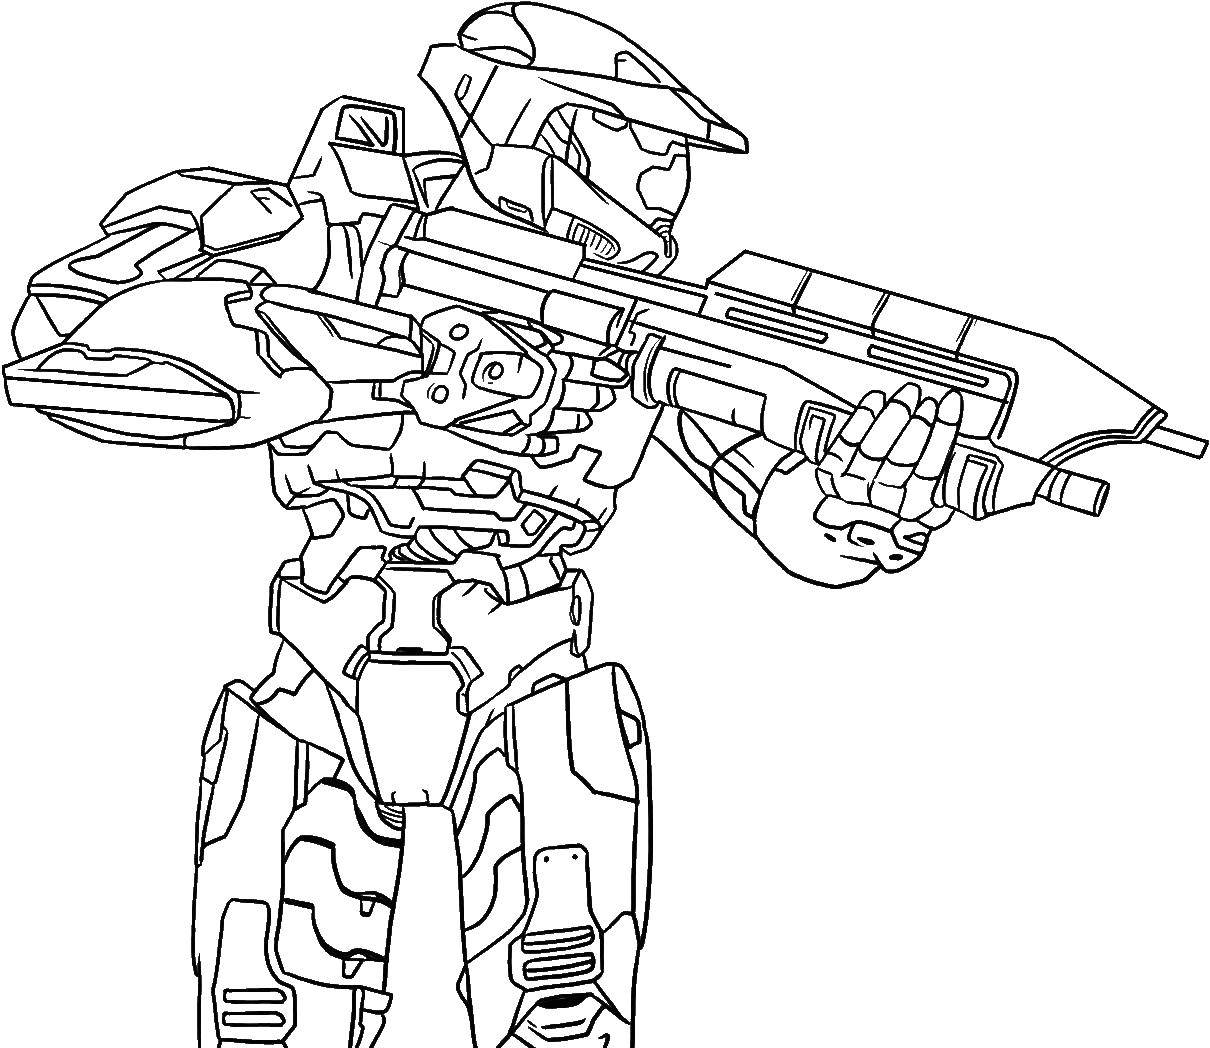 Coloring An armored soldier with a gun. Category weapons. Tags:  automatic , soldiers.